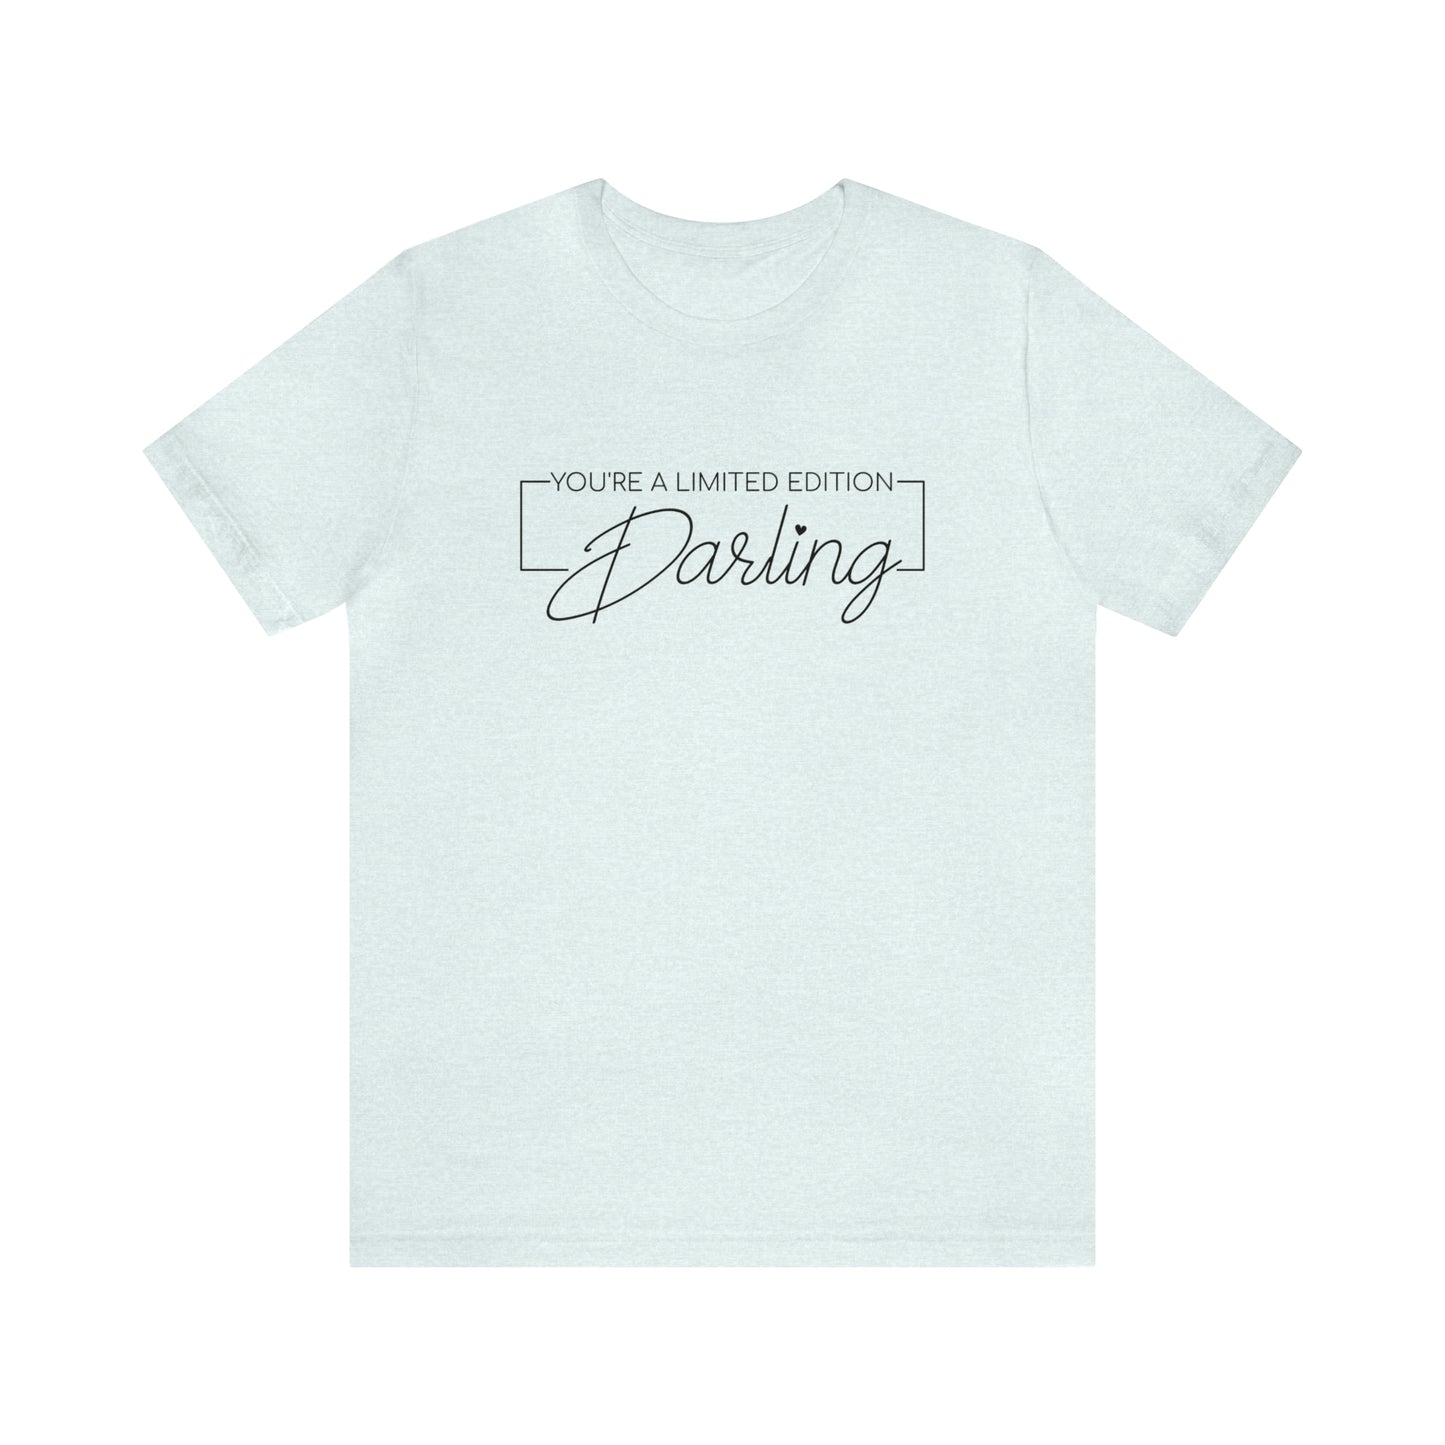 You're a Limited Edition Darling...... Motivational Women's T-Shirt